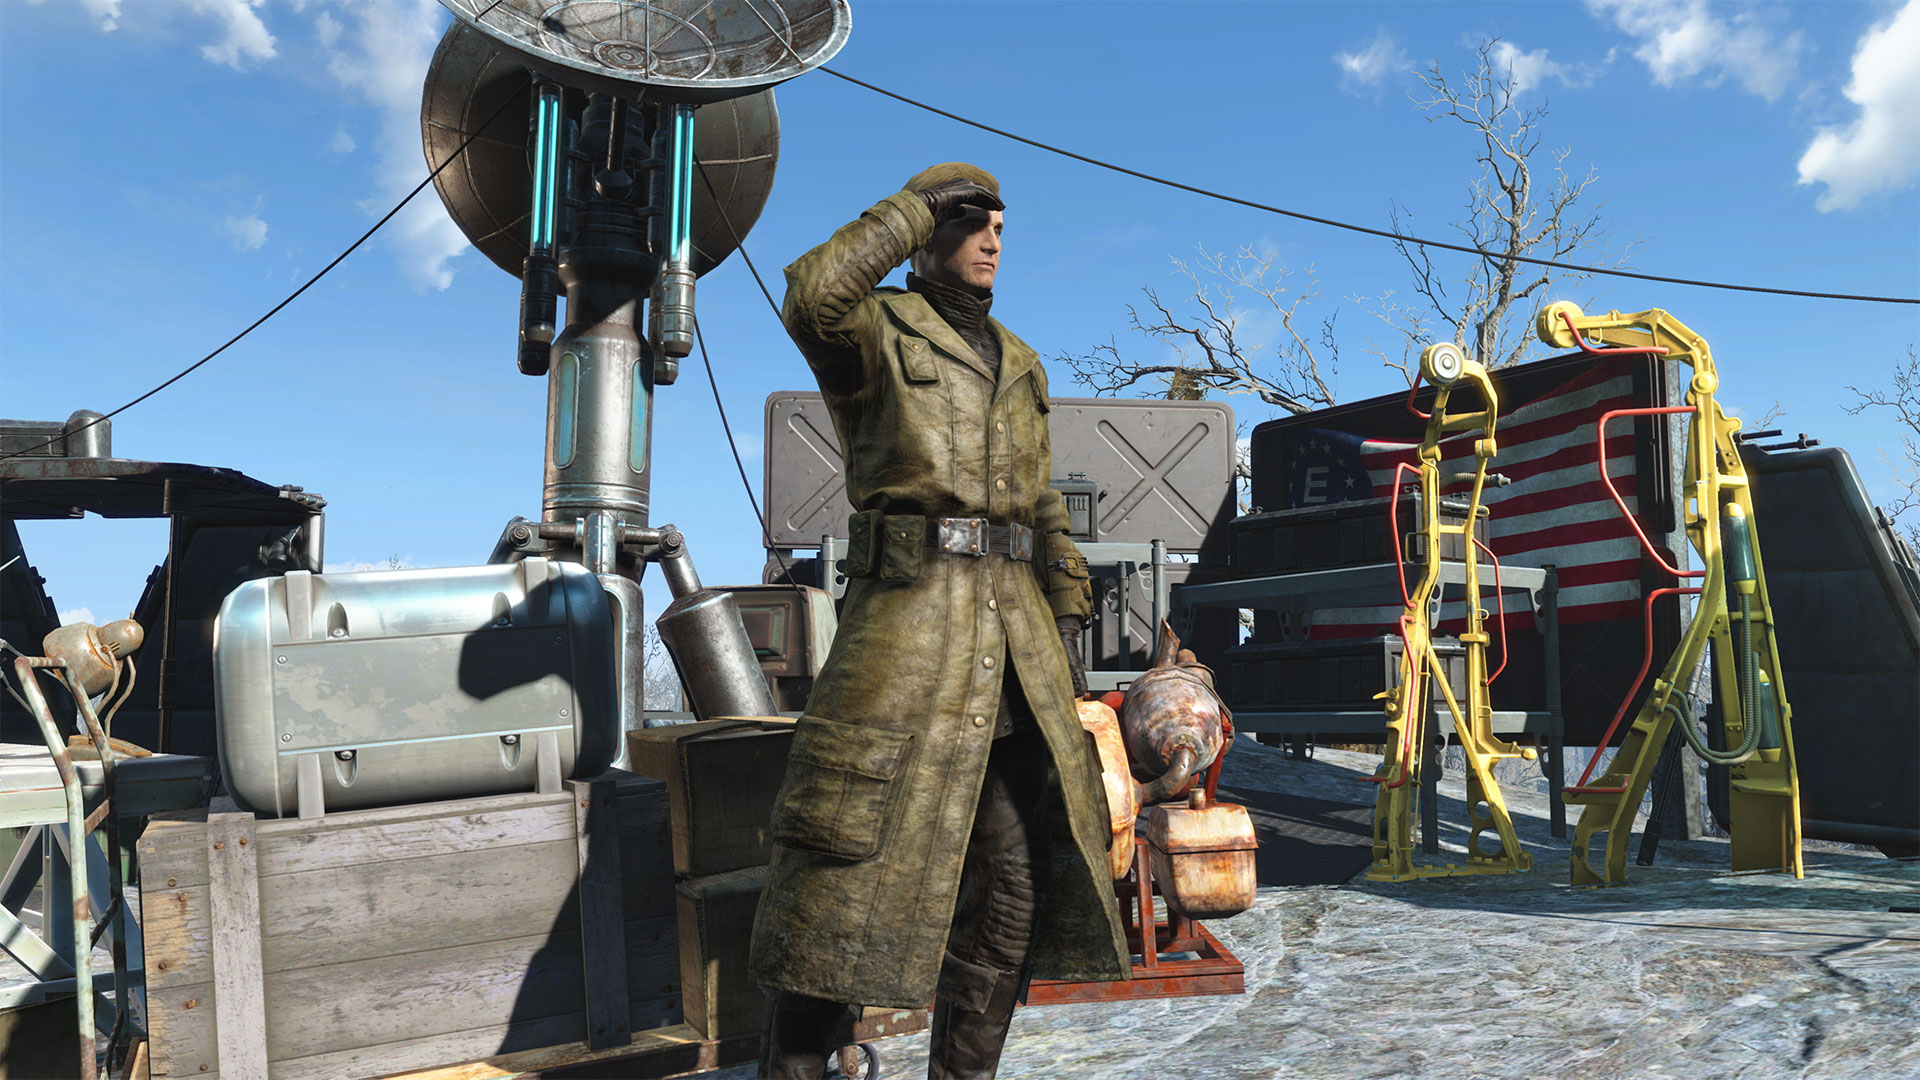 Fallout 4 is getting free updates on consoles and PC on April 25